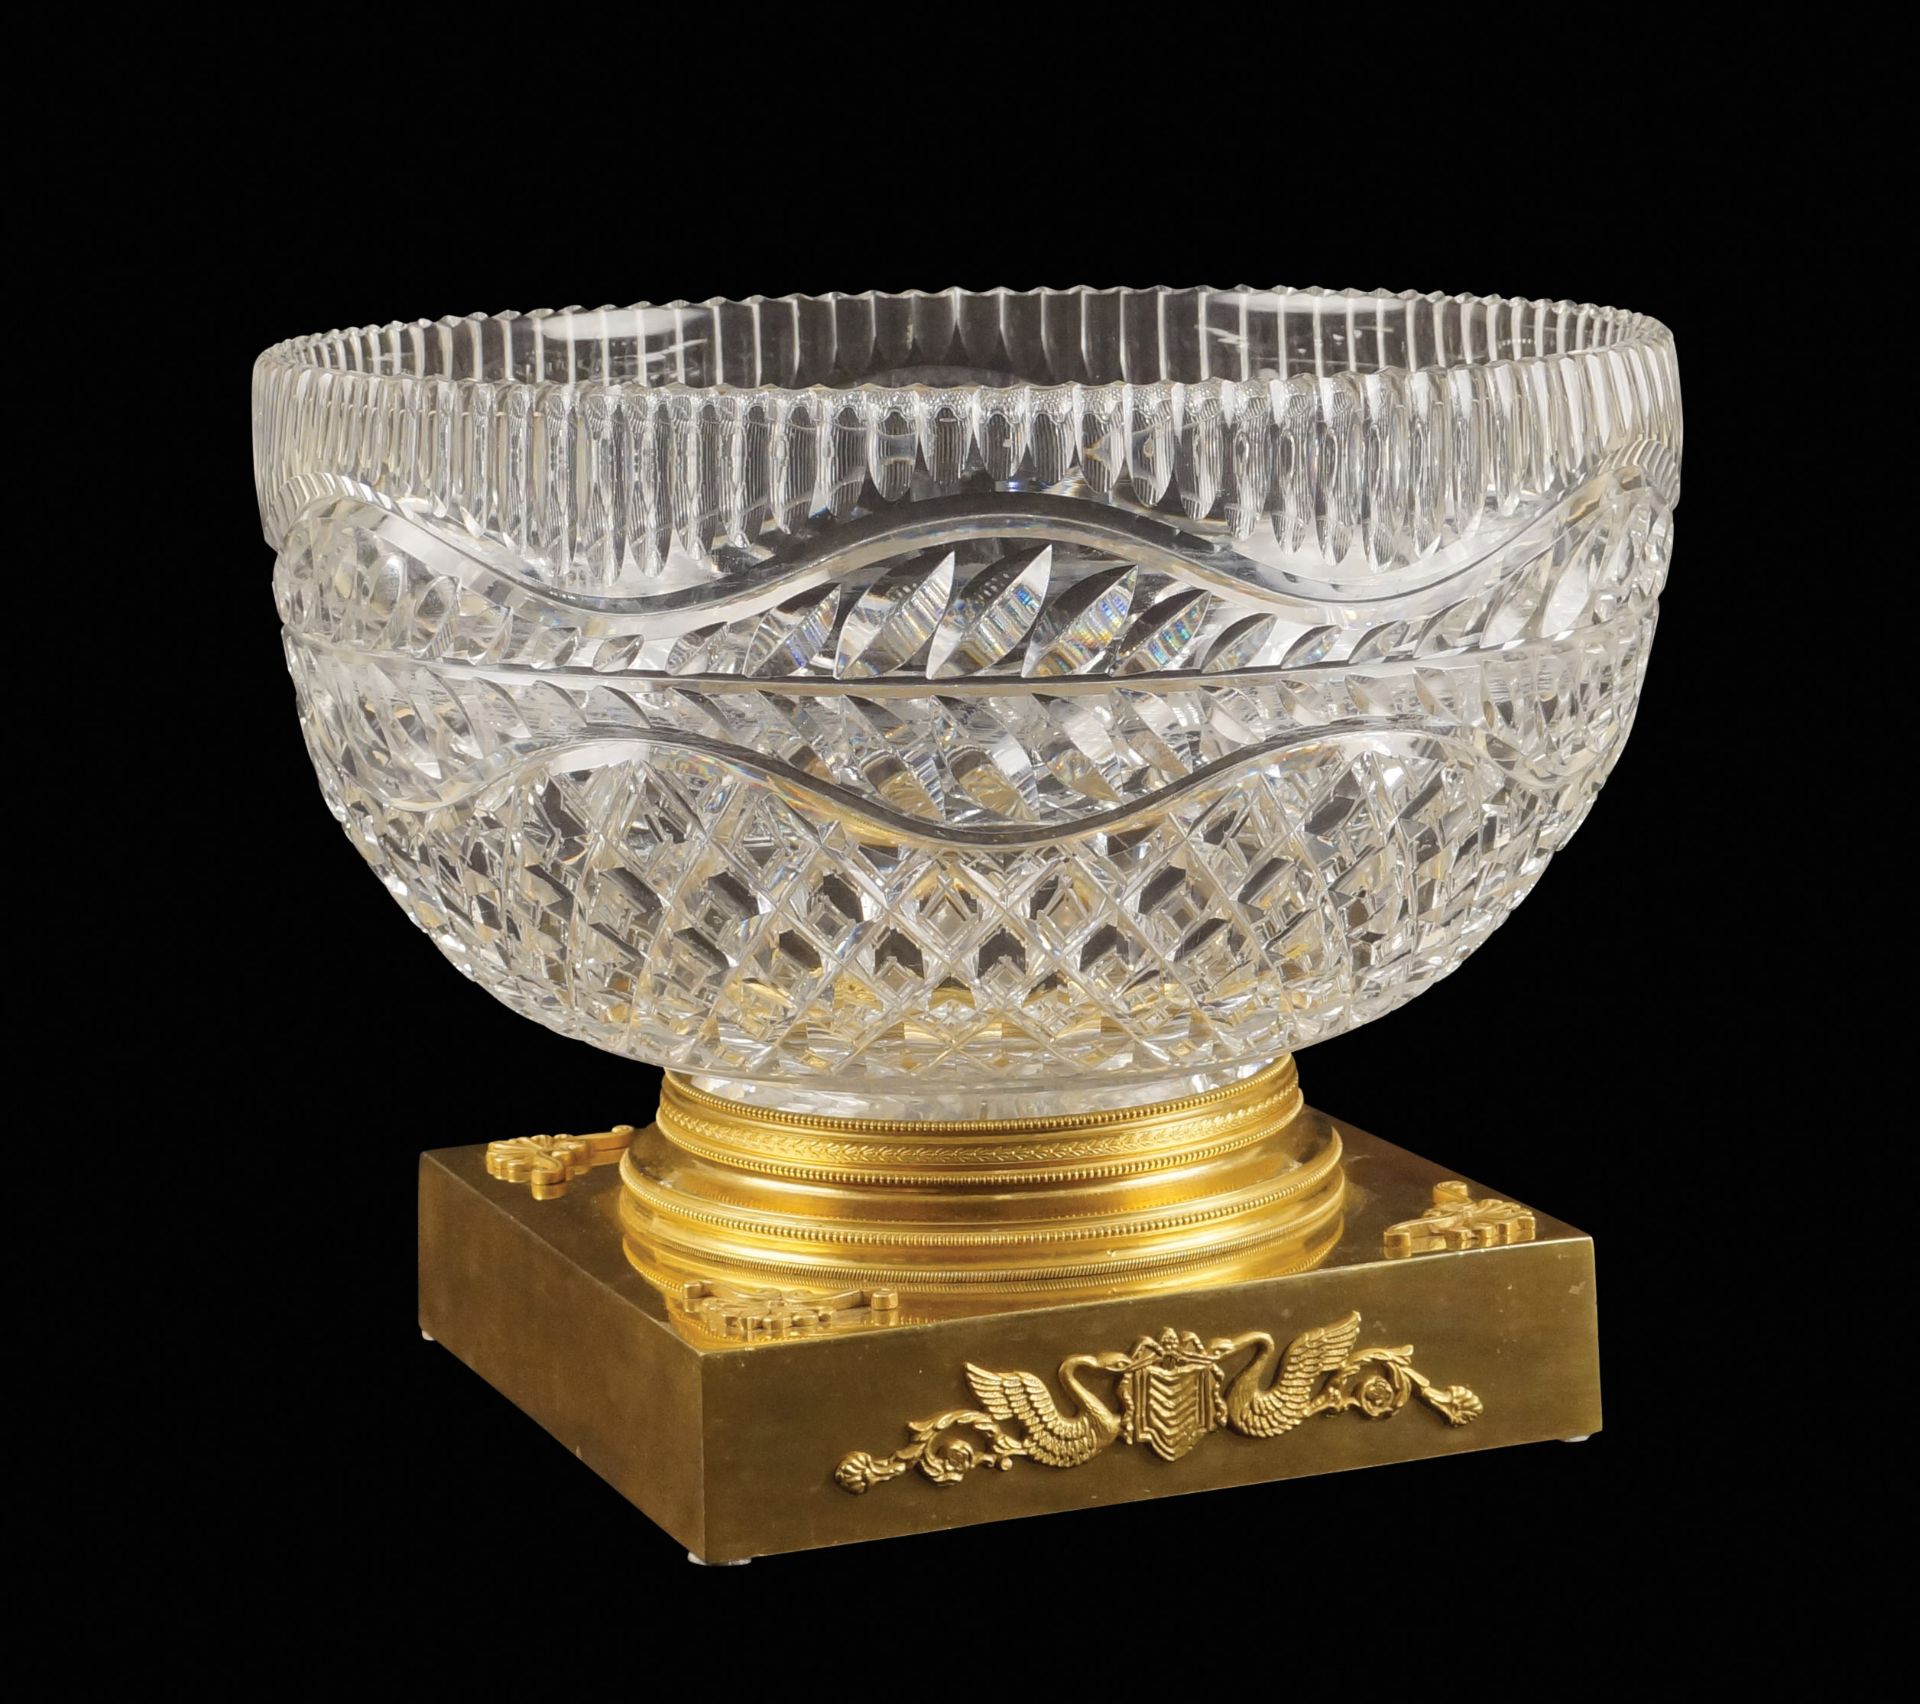 A great French crystal and gilt-bronze centerpiece